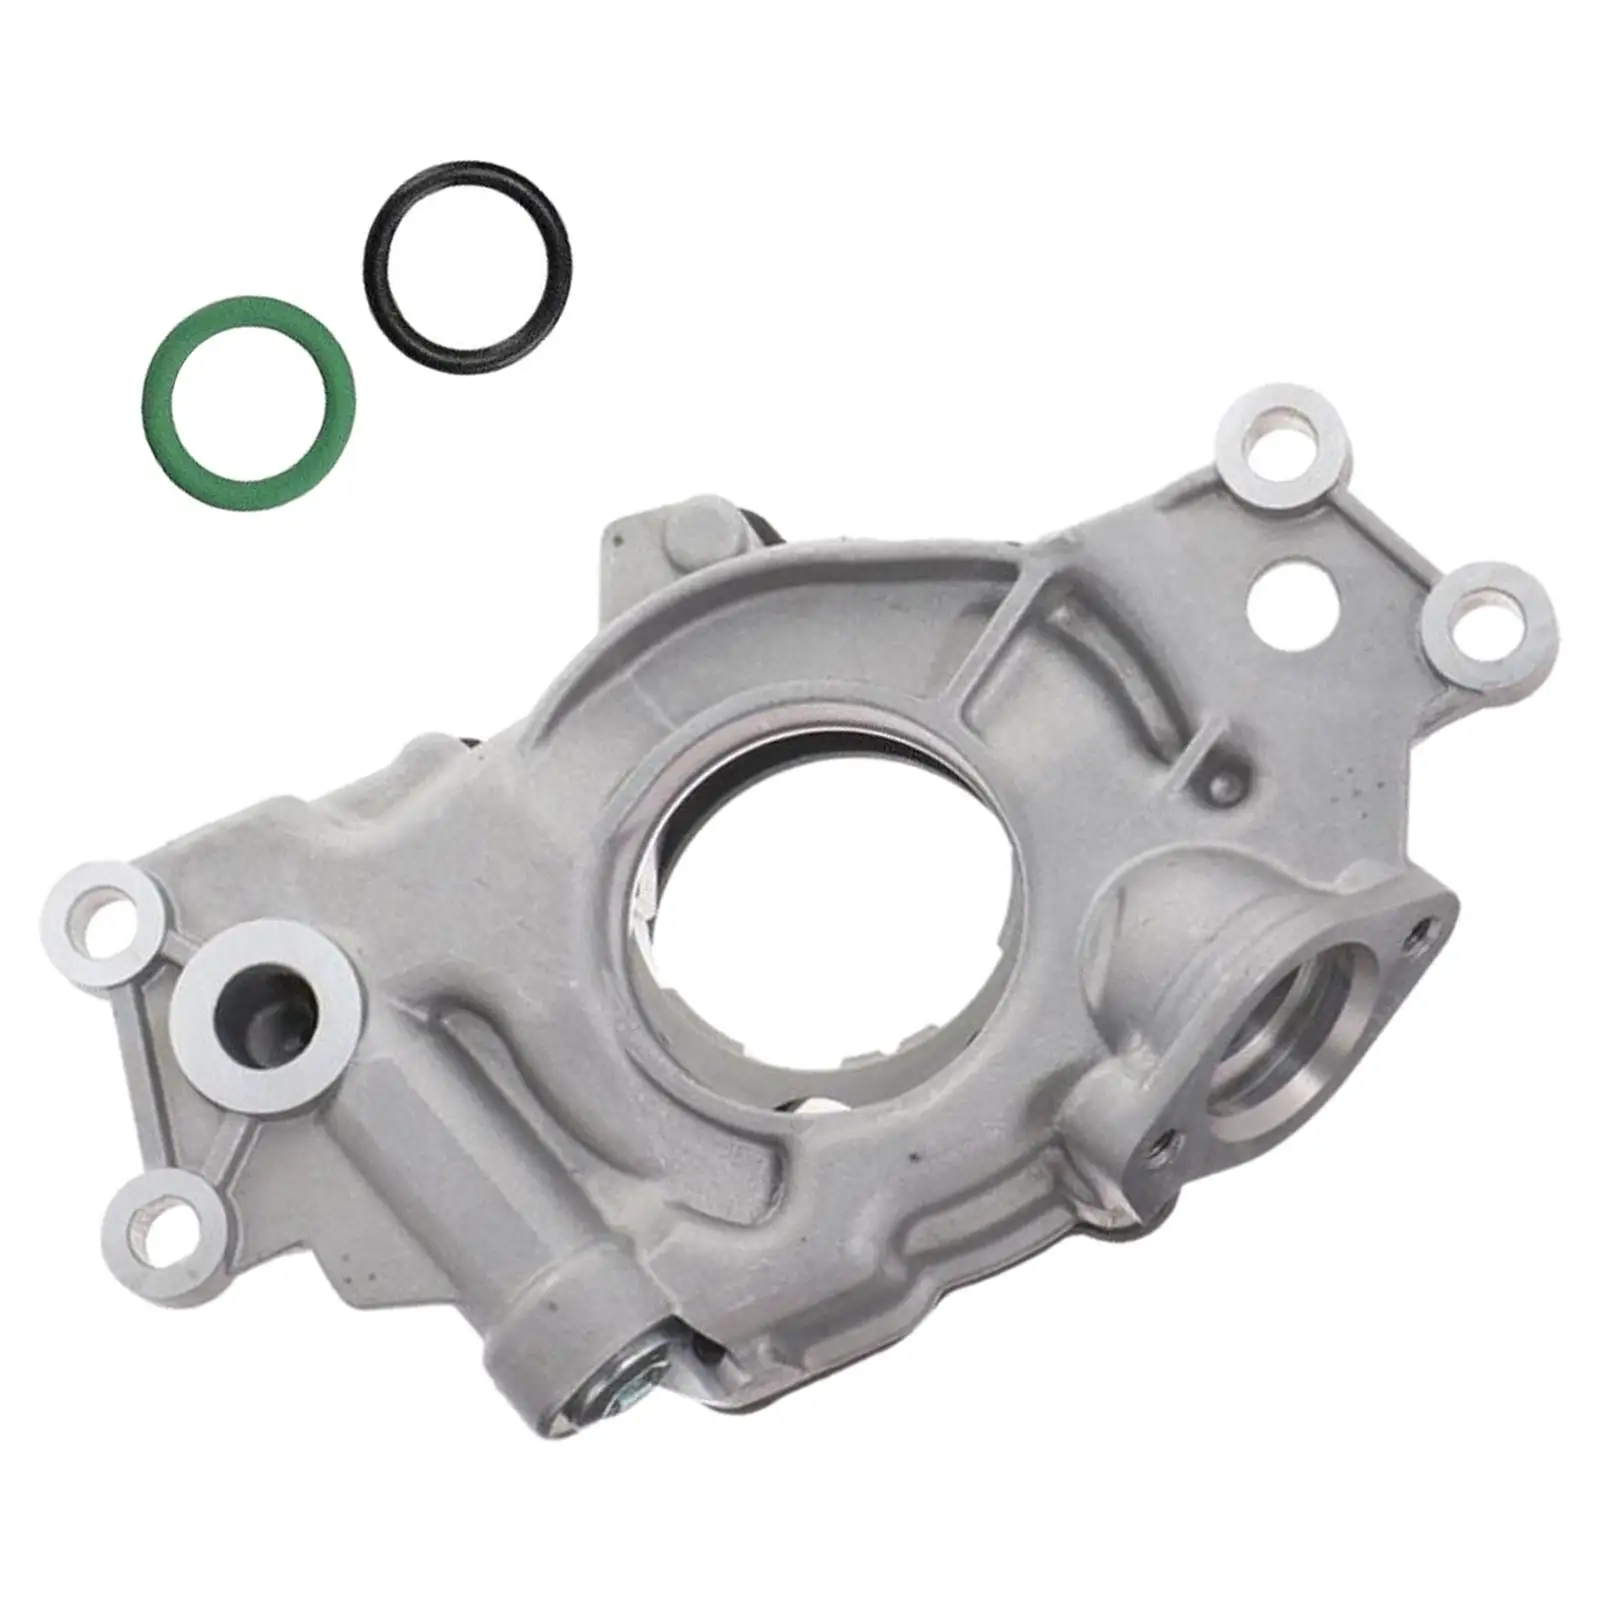 Engine Oil Pump Replacement M365hv for L92 Gen 4 Ls-based Engines LH6